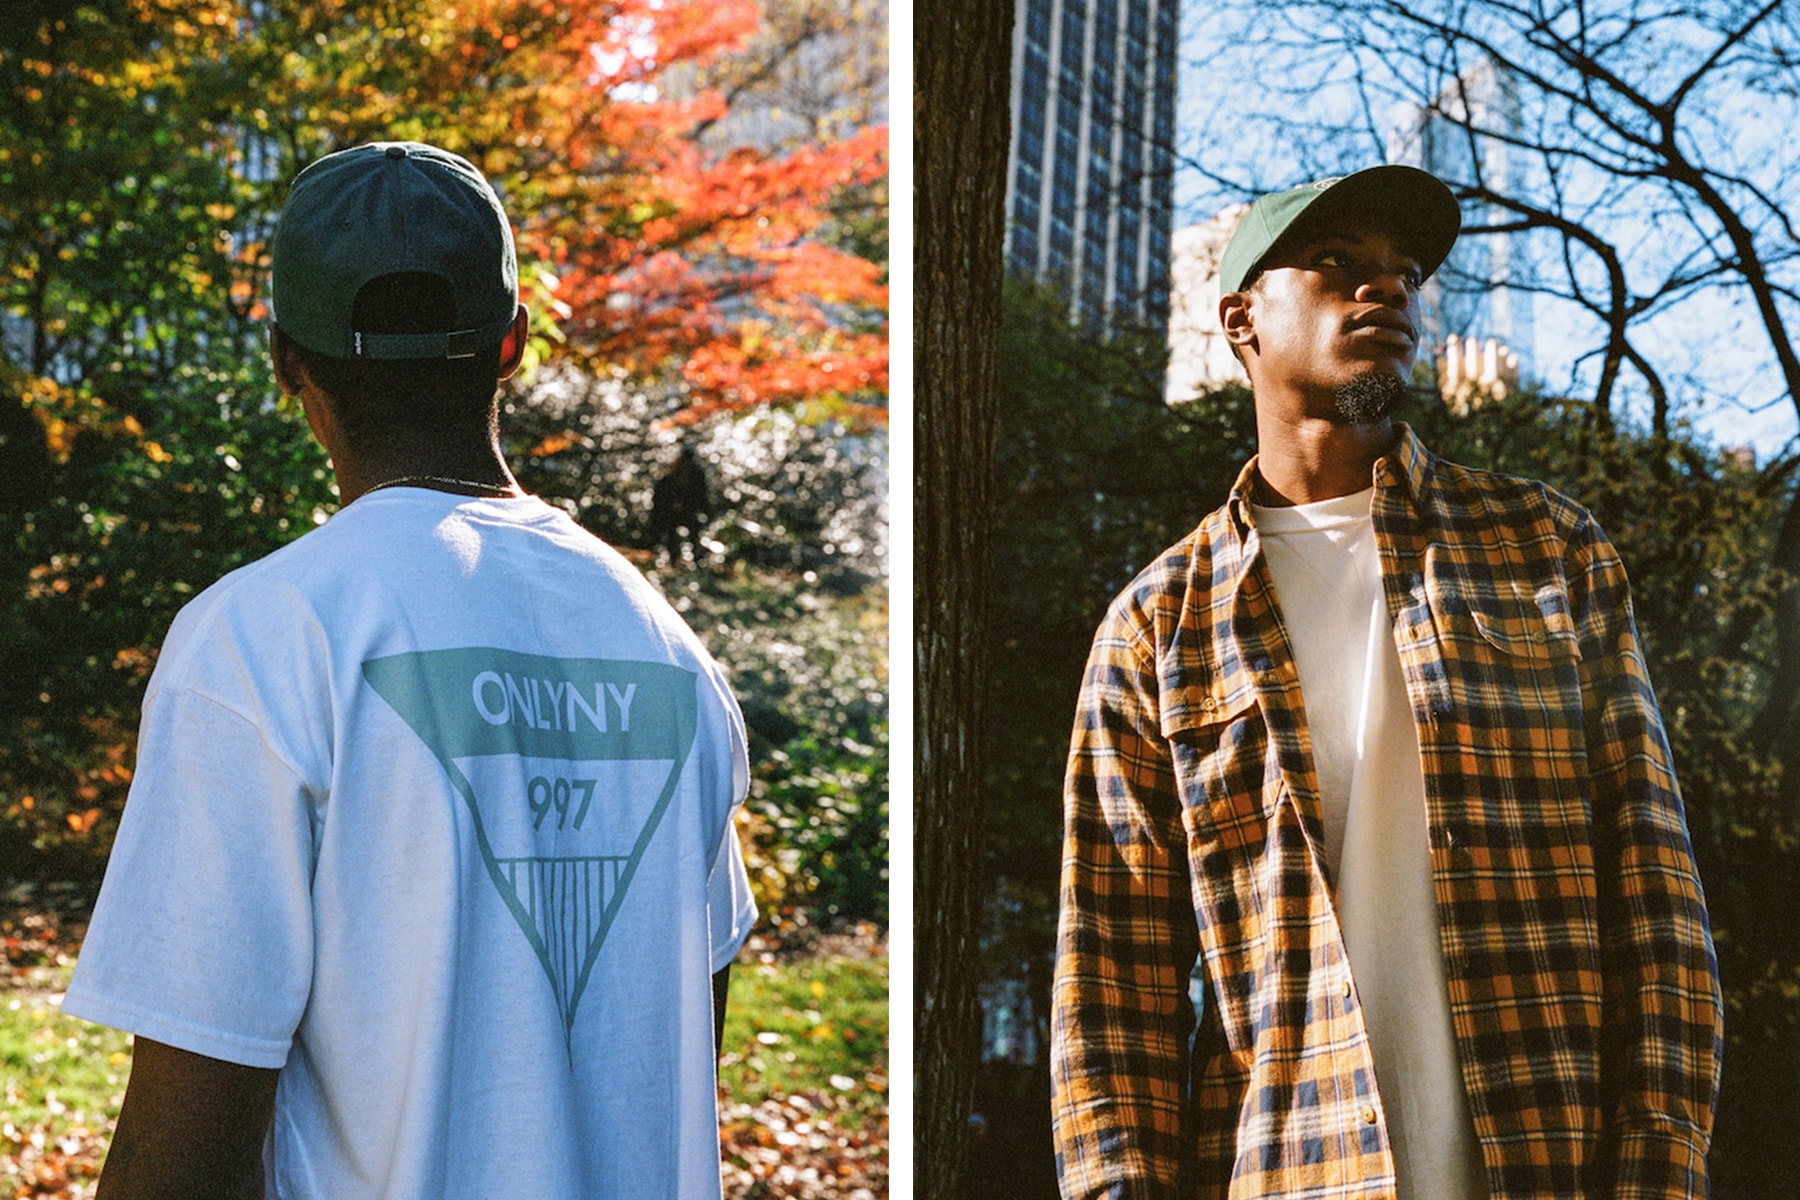 ONLY NY 2016 Holiday Collection Lookbook Central Park Pullovers Vests Flannels Hats Vests